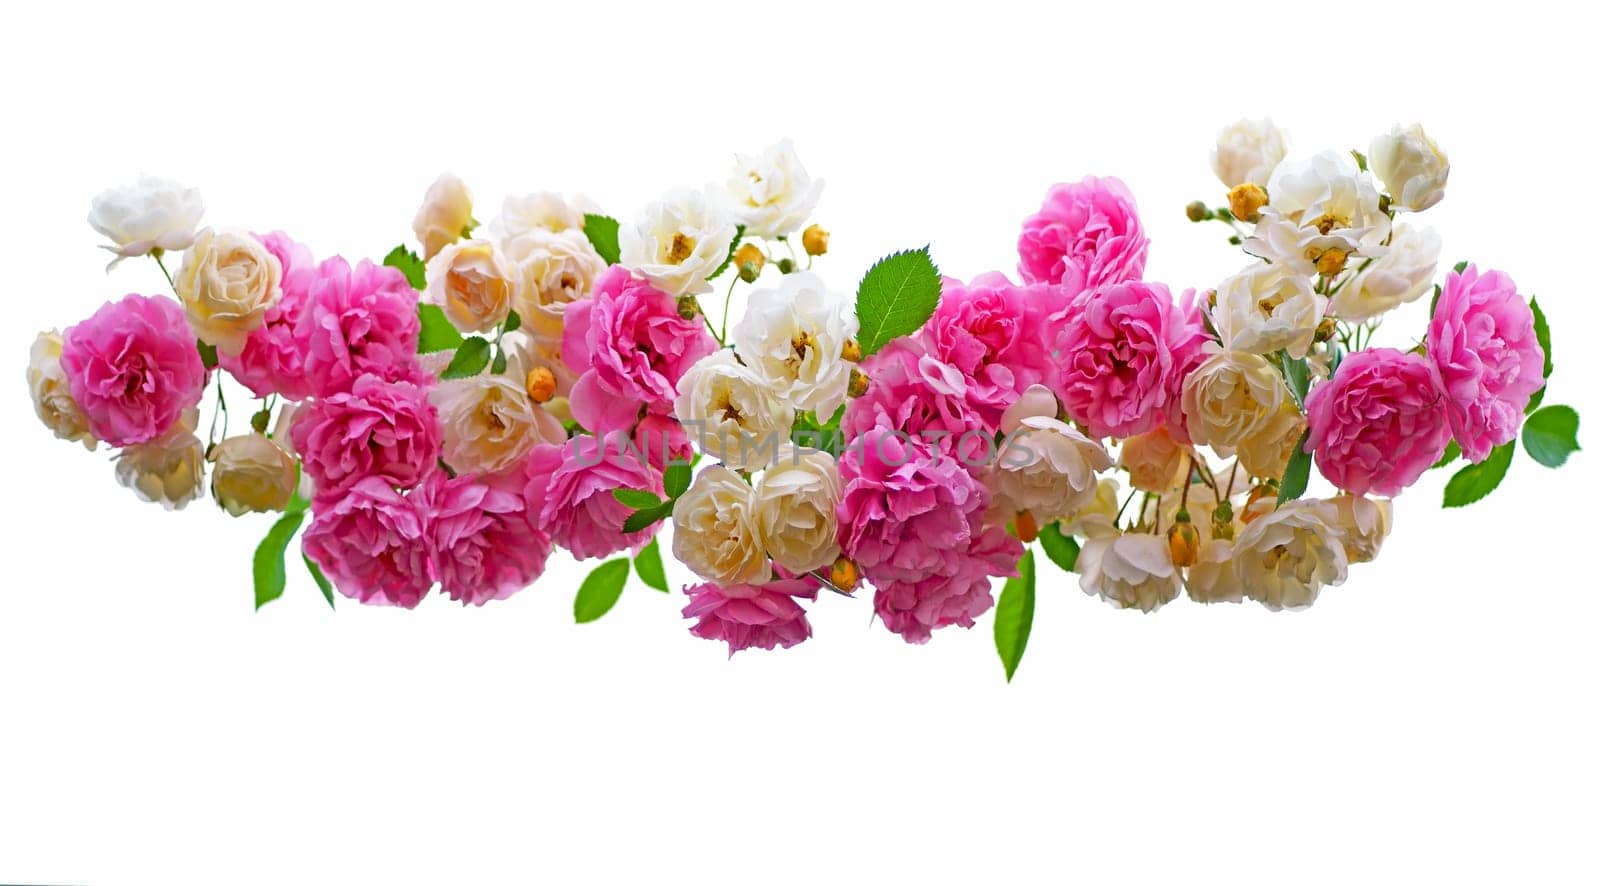 garland of bright summer white and pink roses on a white background by aprilphoto